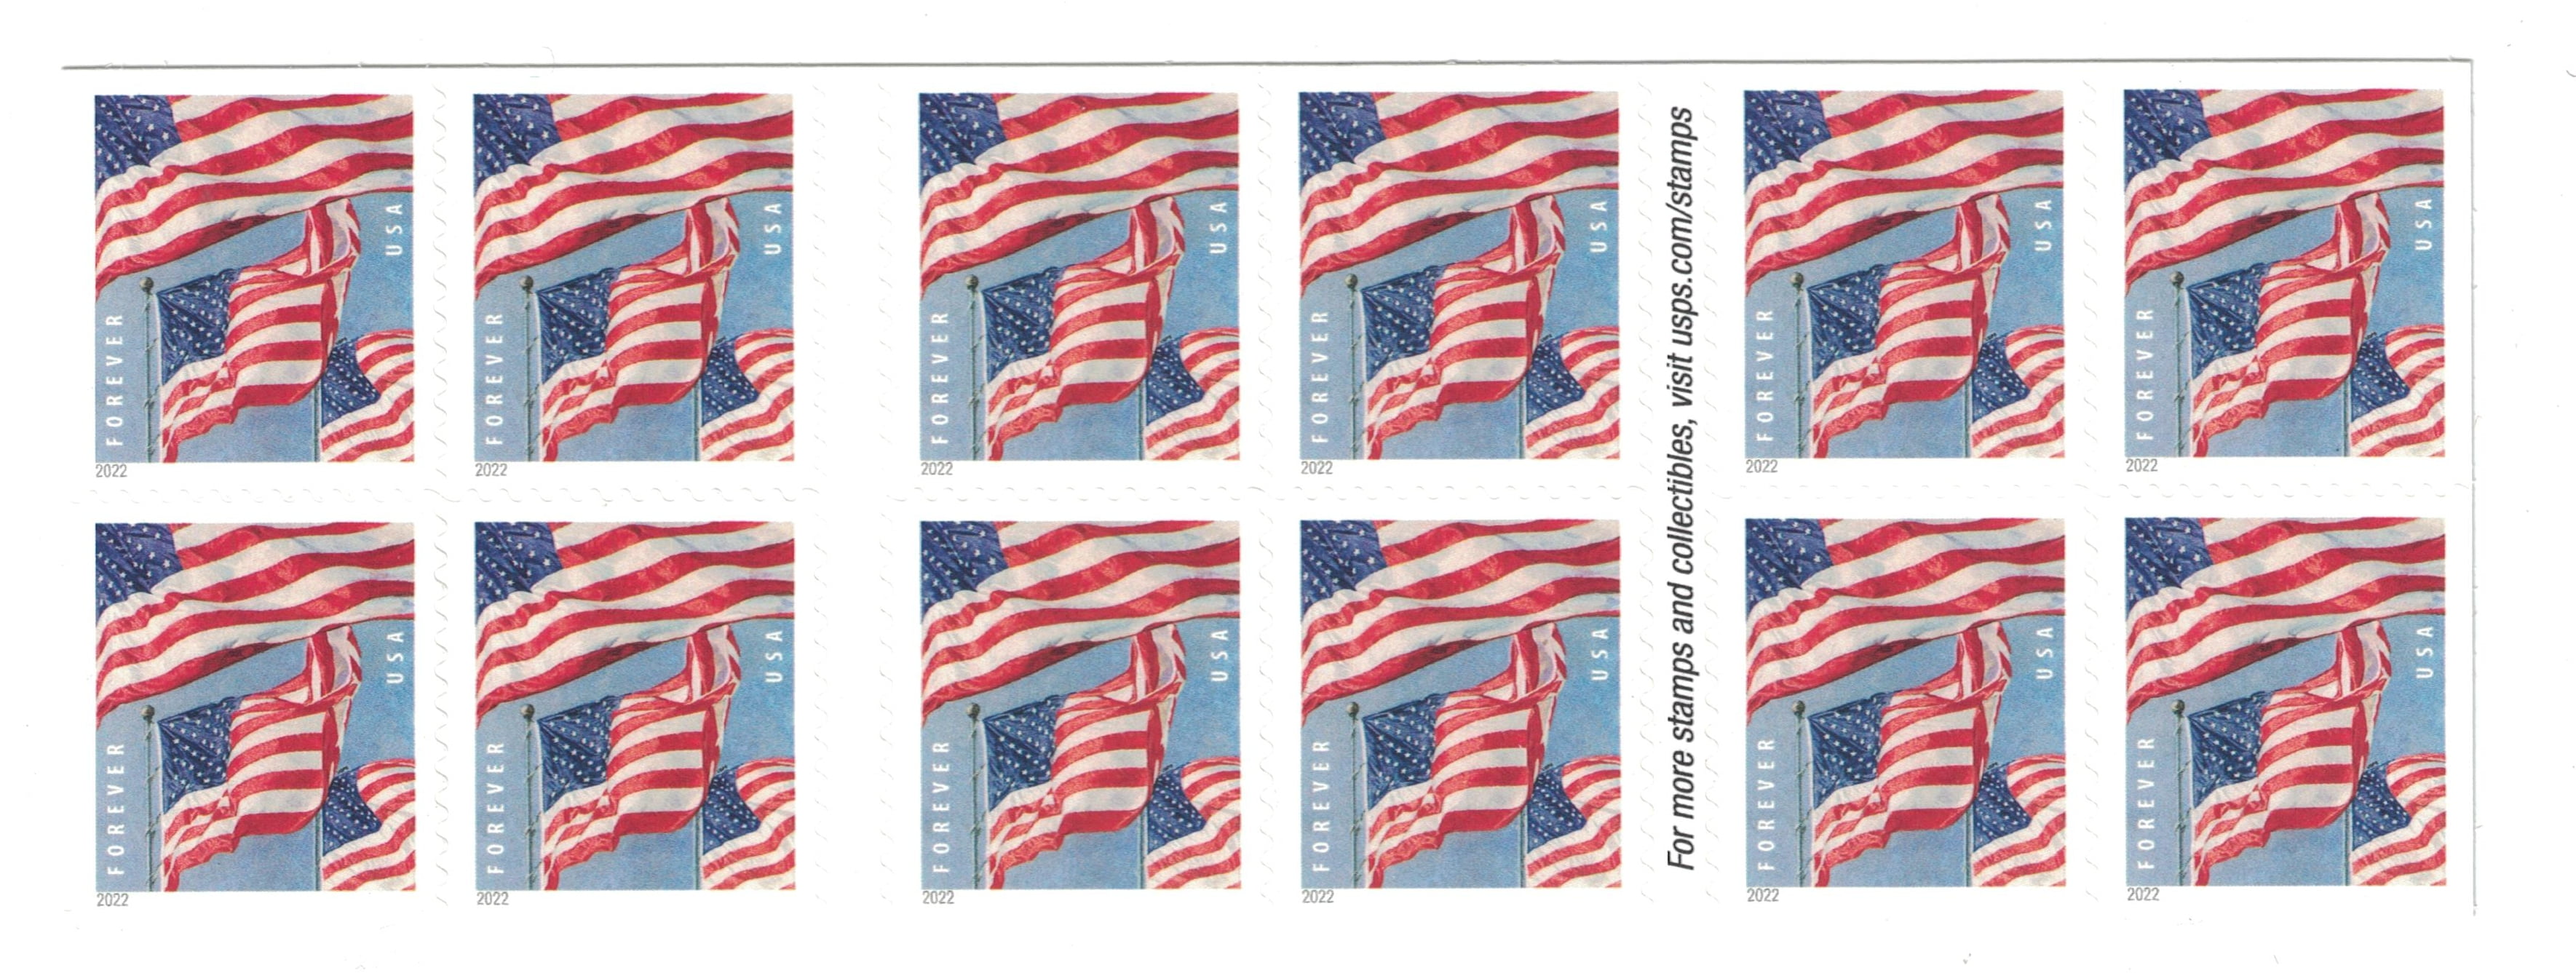 USPS U.S Flag 2022 Book of 20 Forever Stamps, Size: One Size